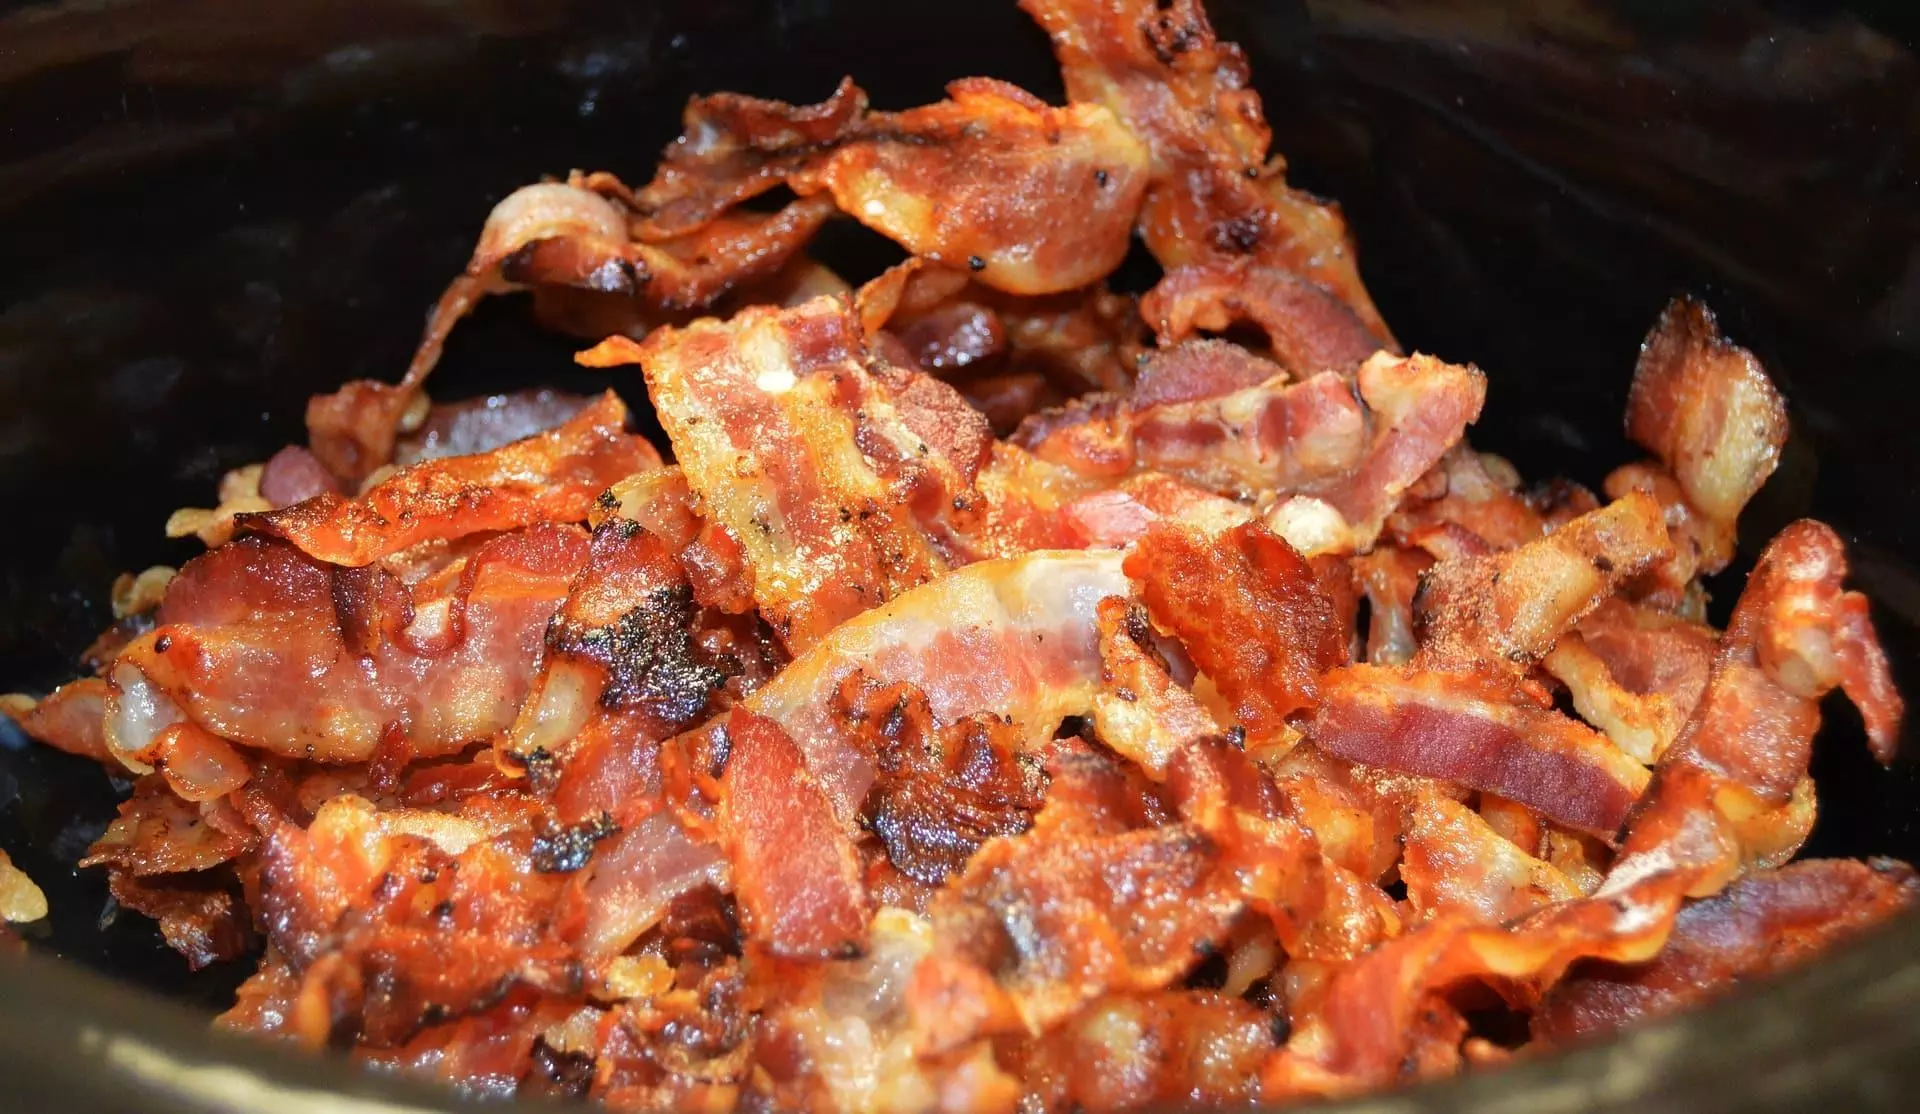 bacon contains advanced glycation end products